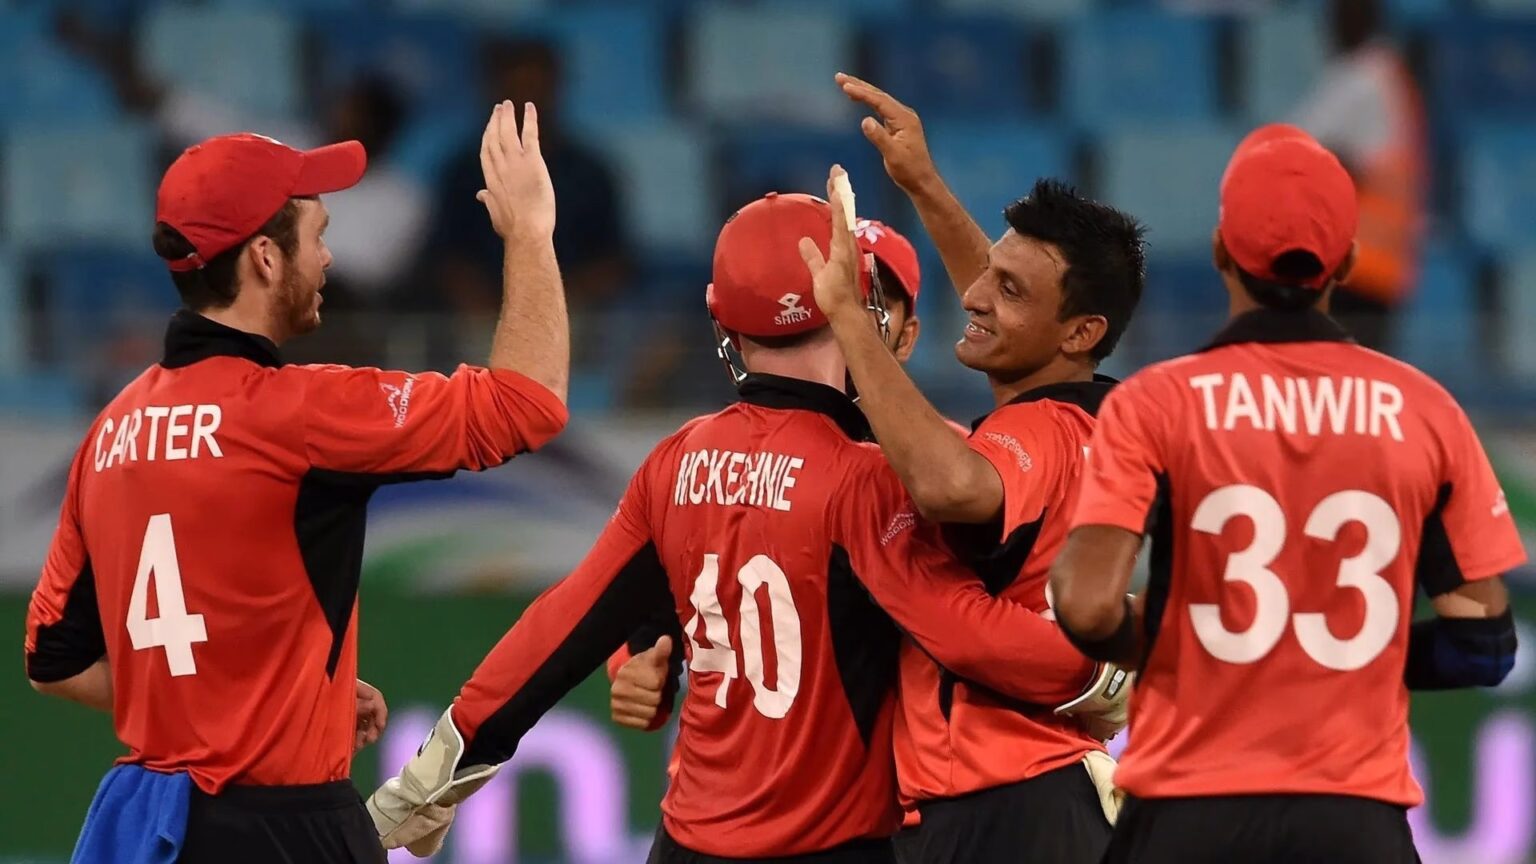 Asia Cup 2022 qualifiers: After an exciting victory against UAE, Hong Kong will join India and Pakistan in group A